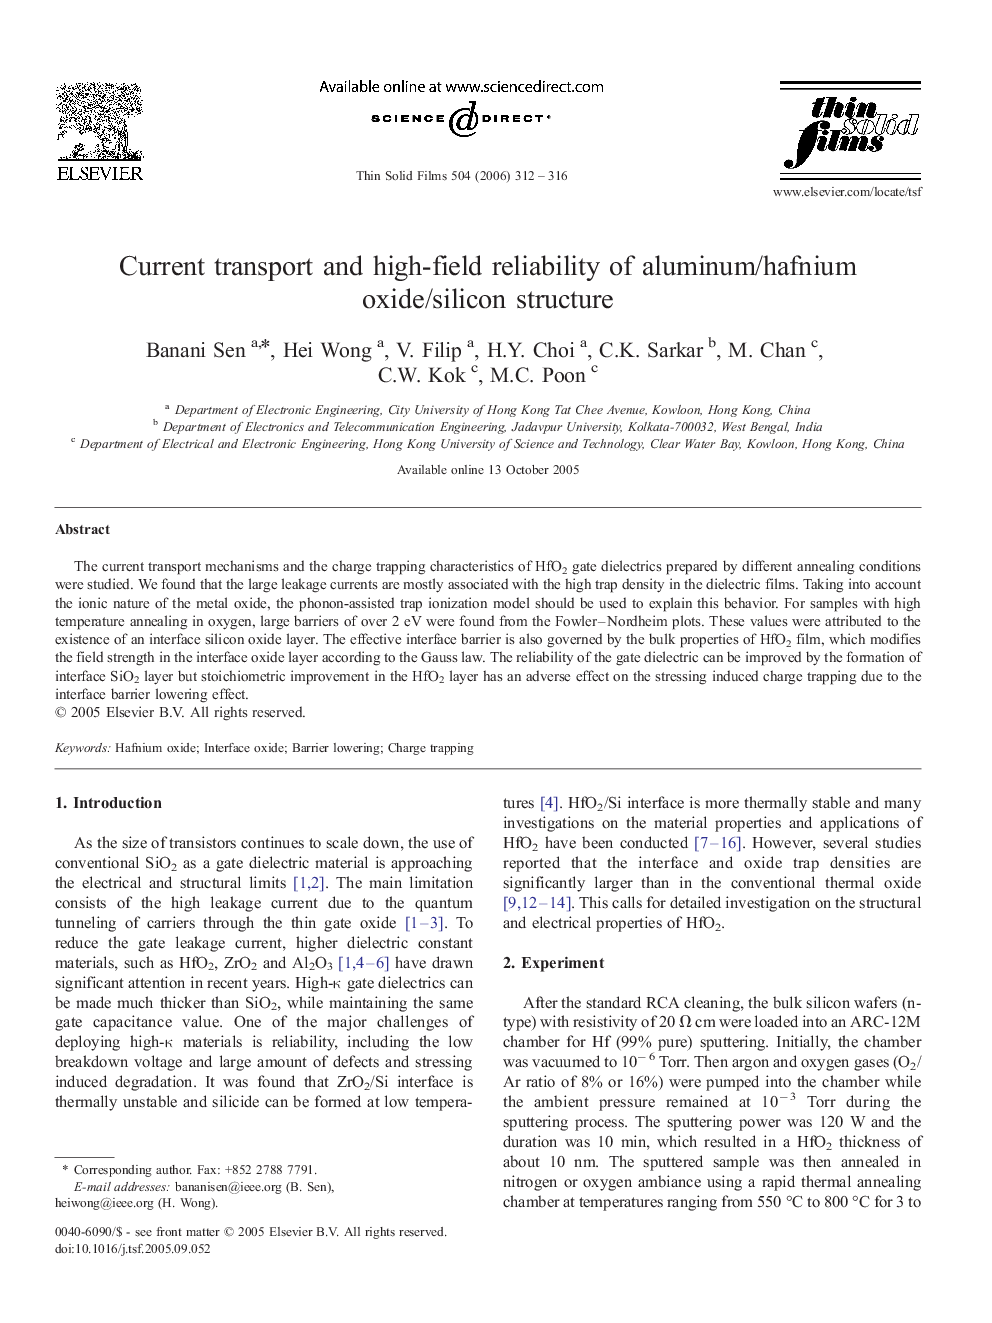 Current transport and high-field reliability of aluminum/hafnium oxide/silicon structure